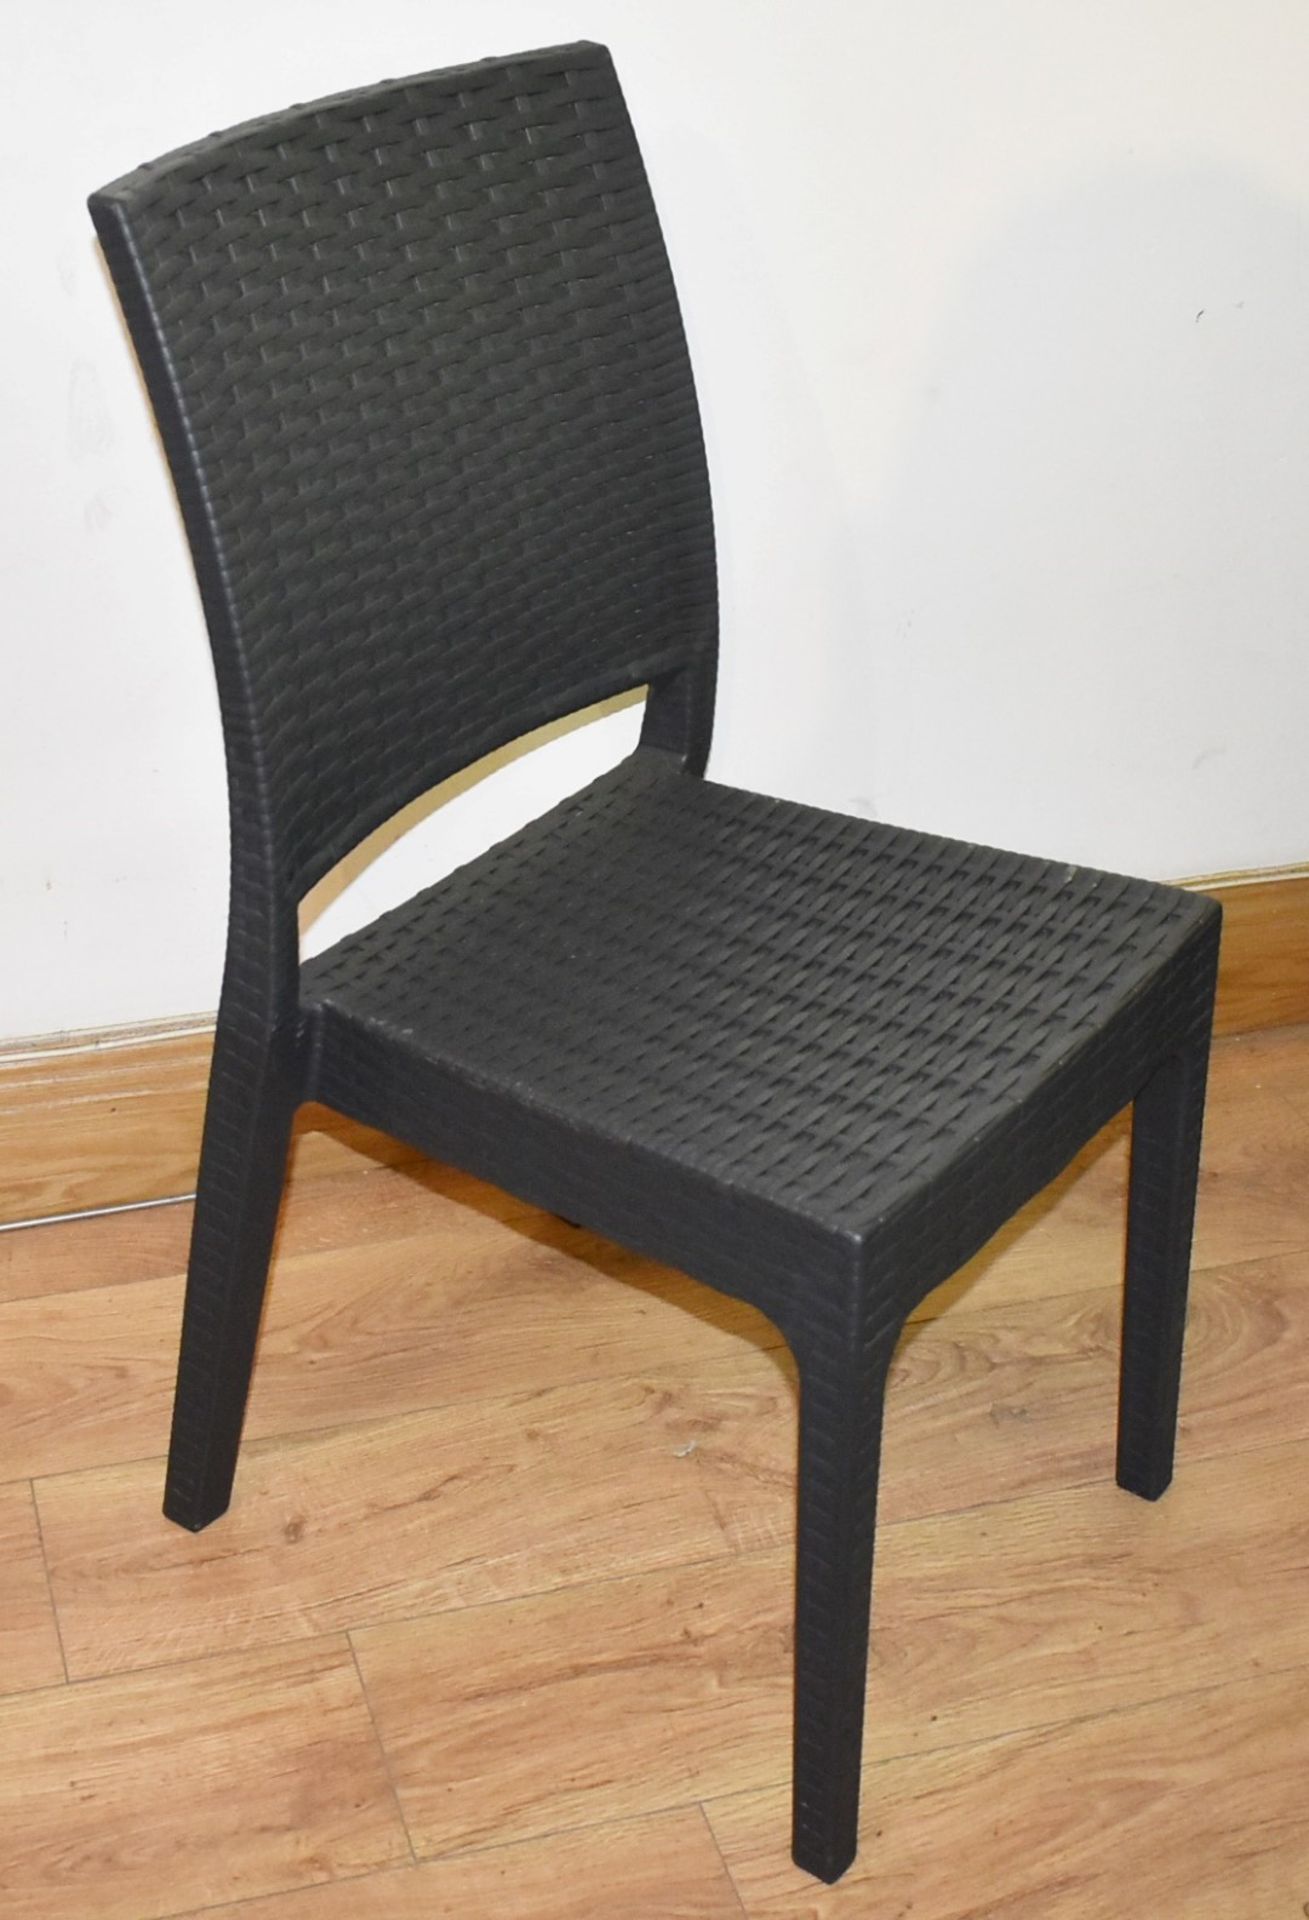 8 x Siesta 'Florida' Rattan Style Garden Chairs In Dark Grey - Suitable For Commercial or Home Use - - Image 6 of 21